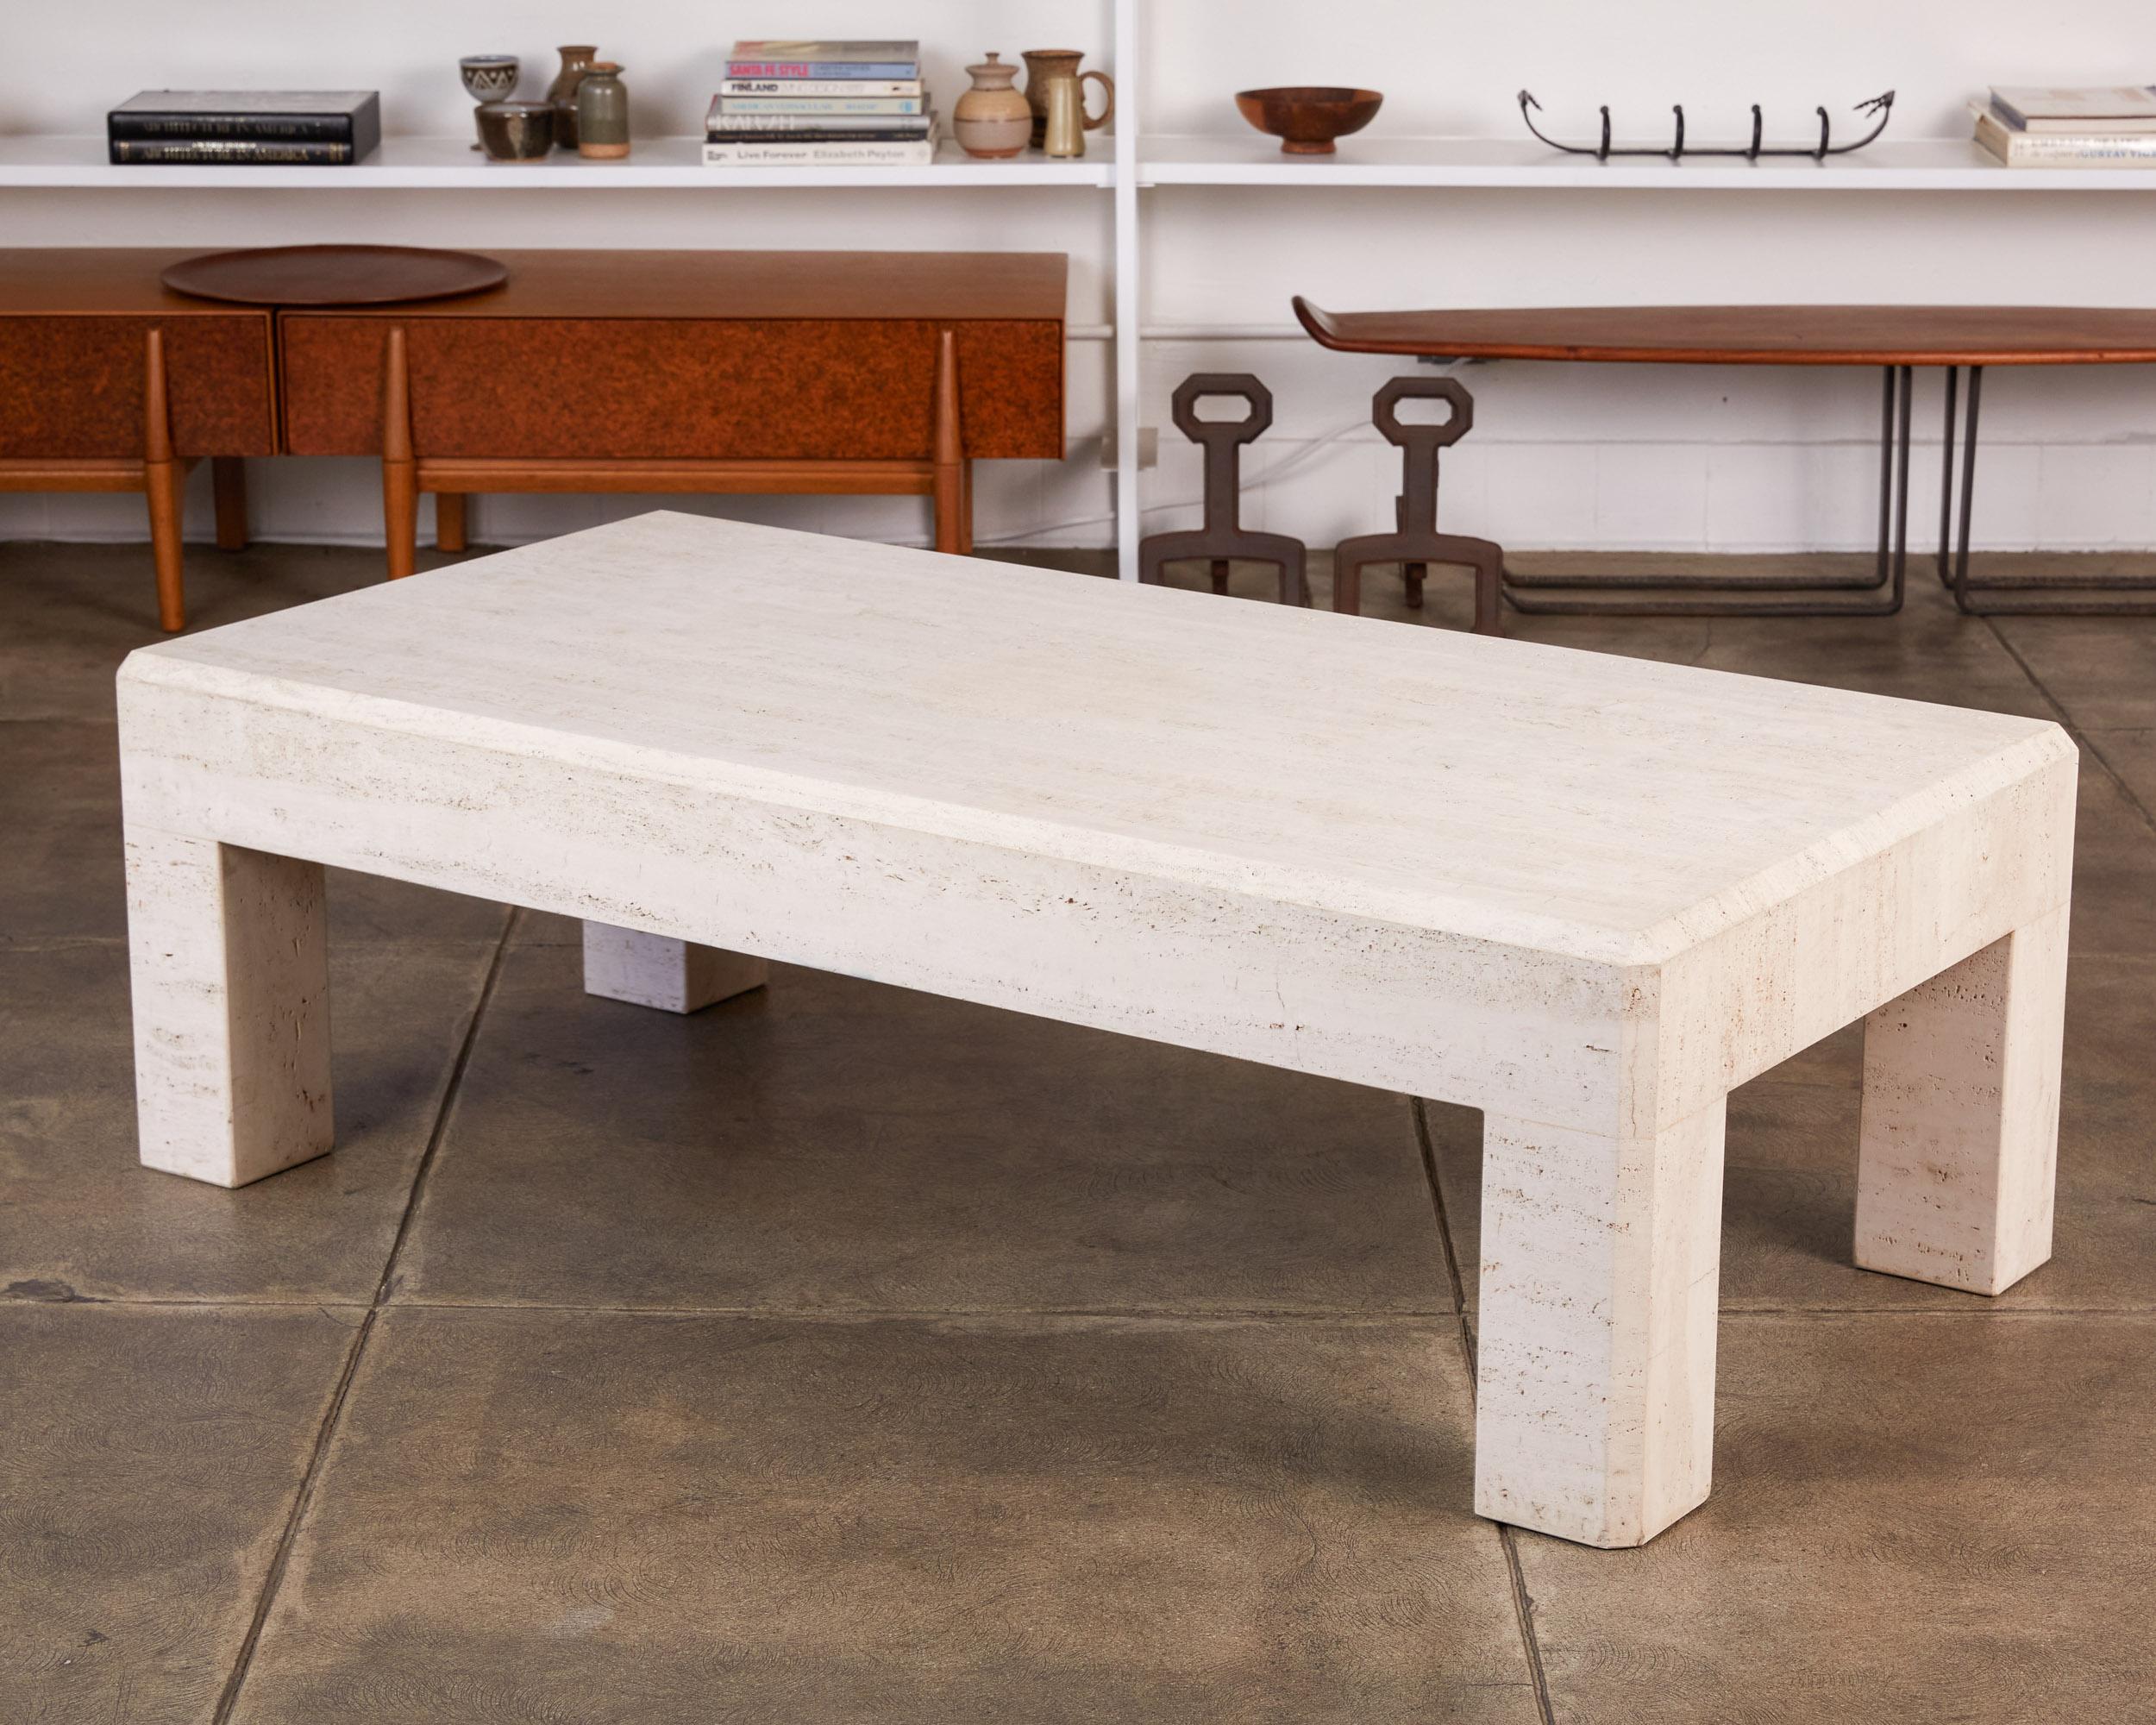 Postmodern travertine coffee table, Italy, circa 1980s. This rectangular table has a thick travertine top, that sits atop four square column legs, featuring a chamfered edge detail. With a sleek shape that is reminiscent of tables designed by